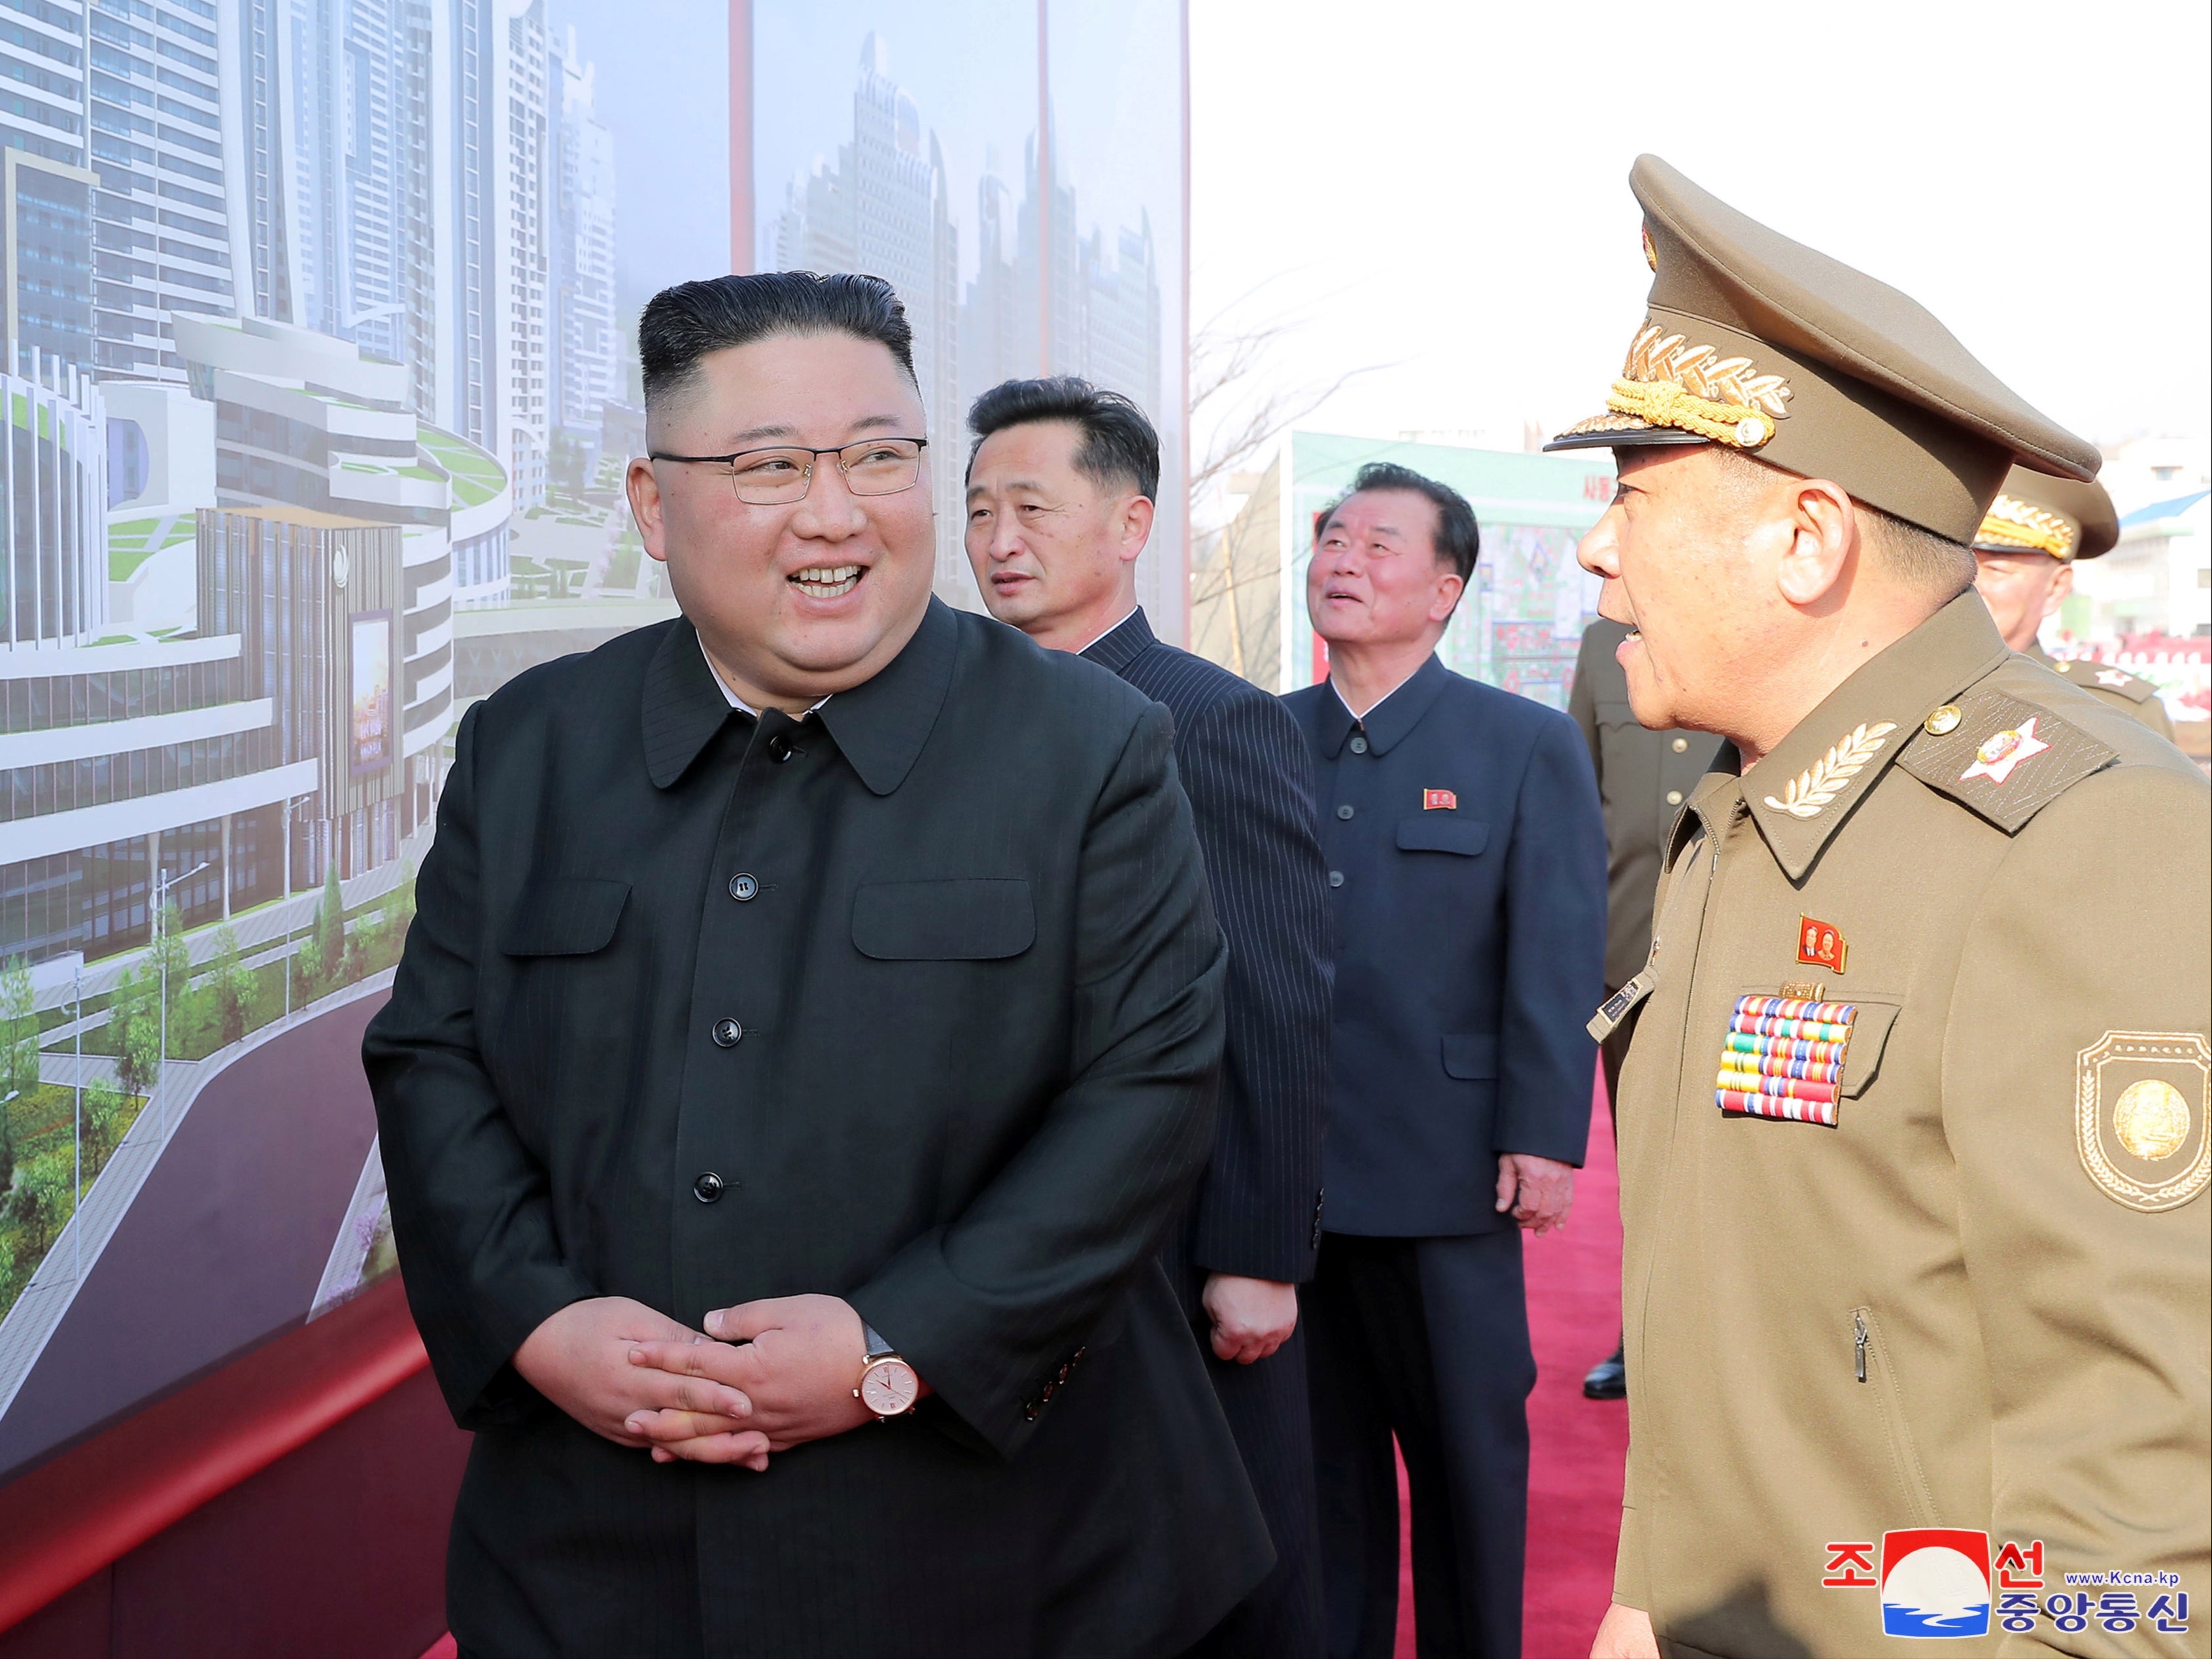 North Korea’s leader, Kim Jong-un, attends a ceremony to inaugurate the start of a building project in Pyongyang